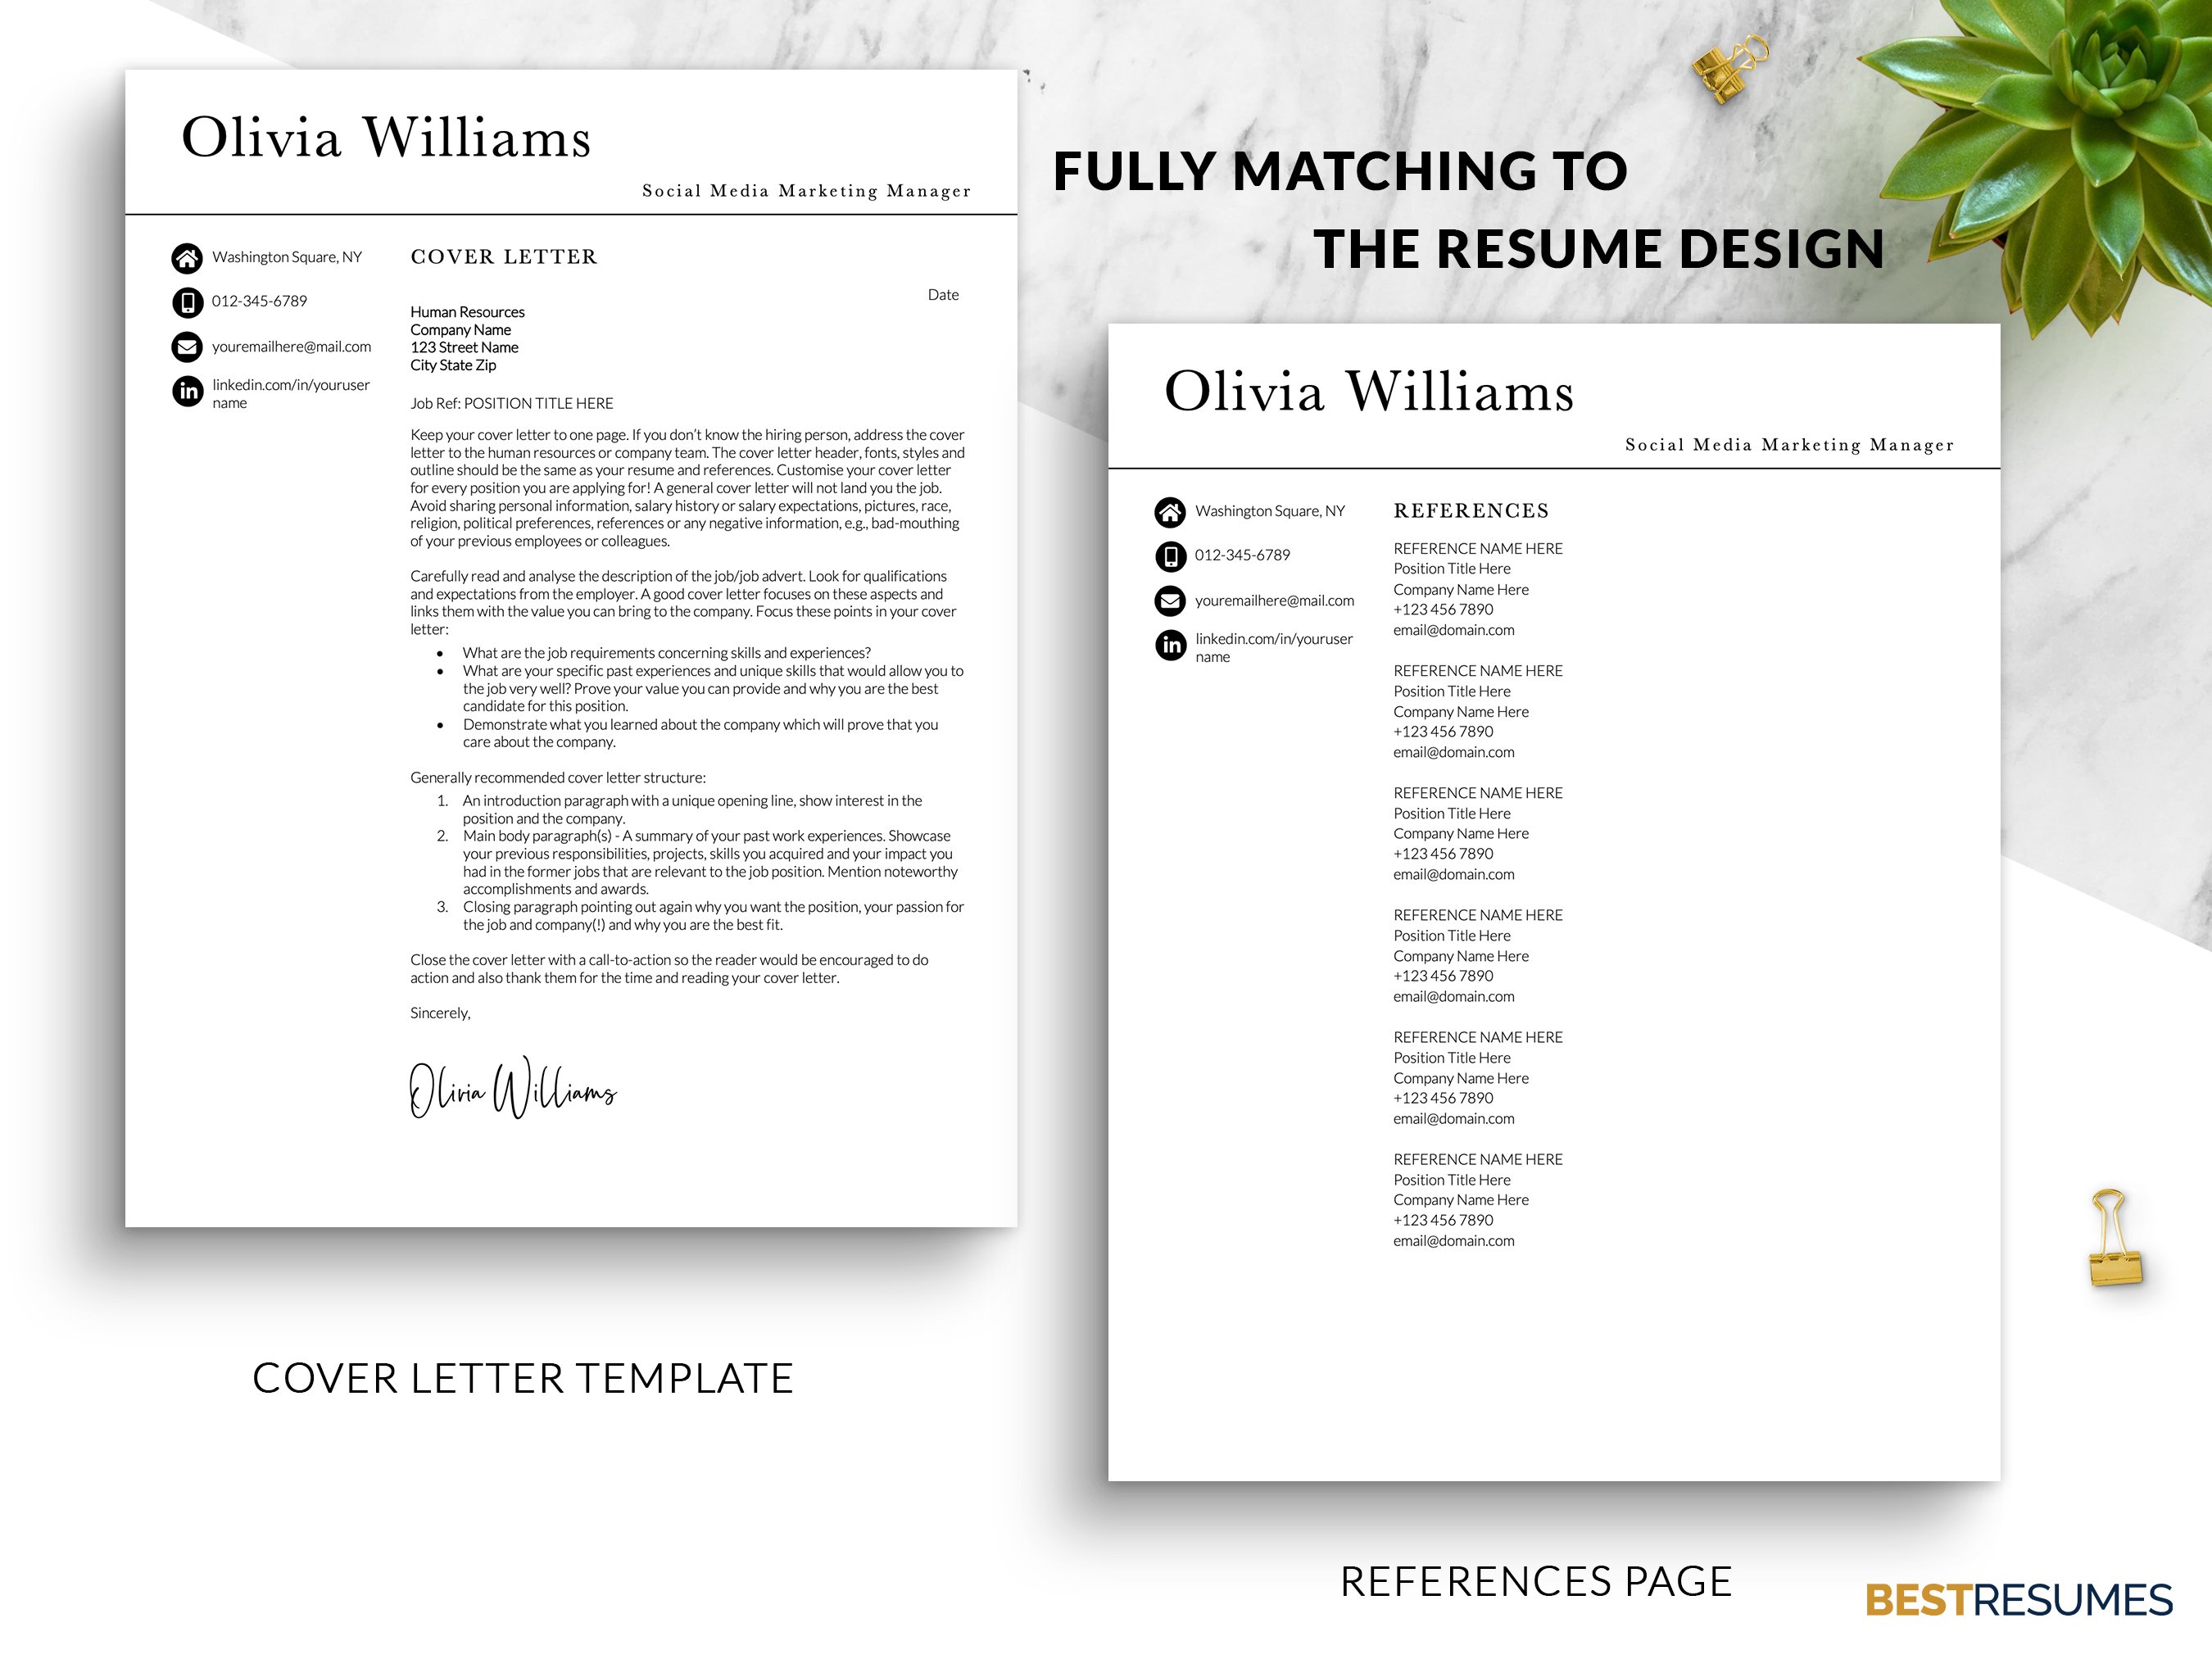 business resume template cover letter template references olivia williams 831